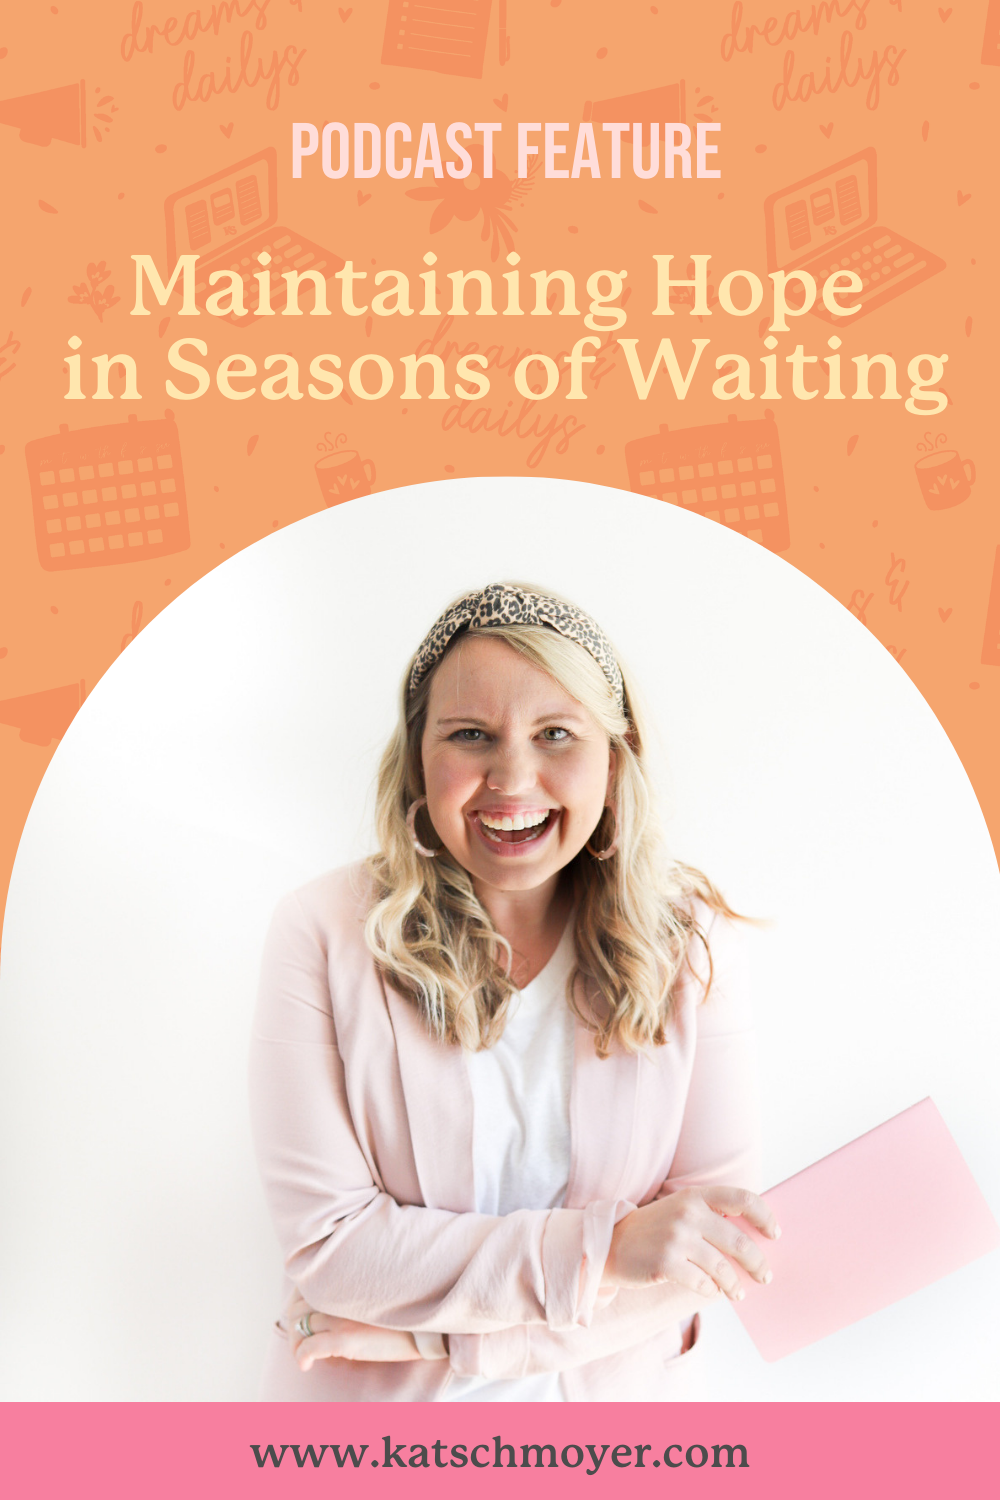 Maintaining Hope in Seasons of Waiting: Consider the Wildflowers Podcast Feature